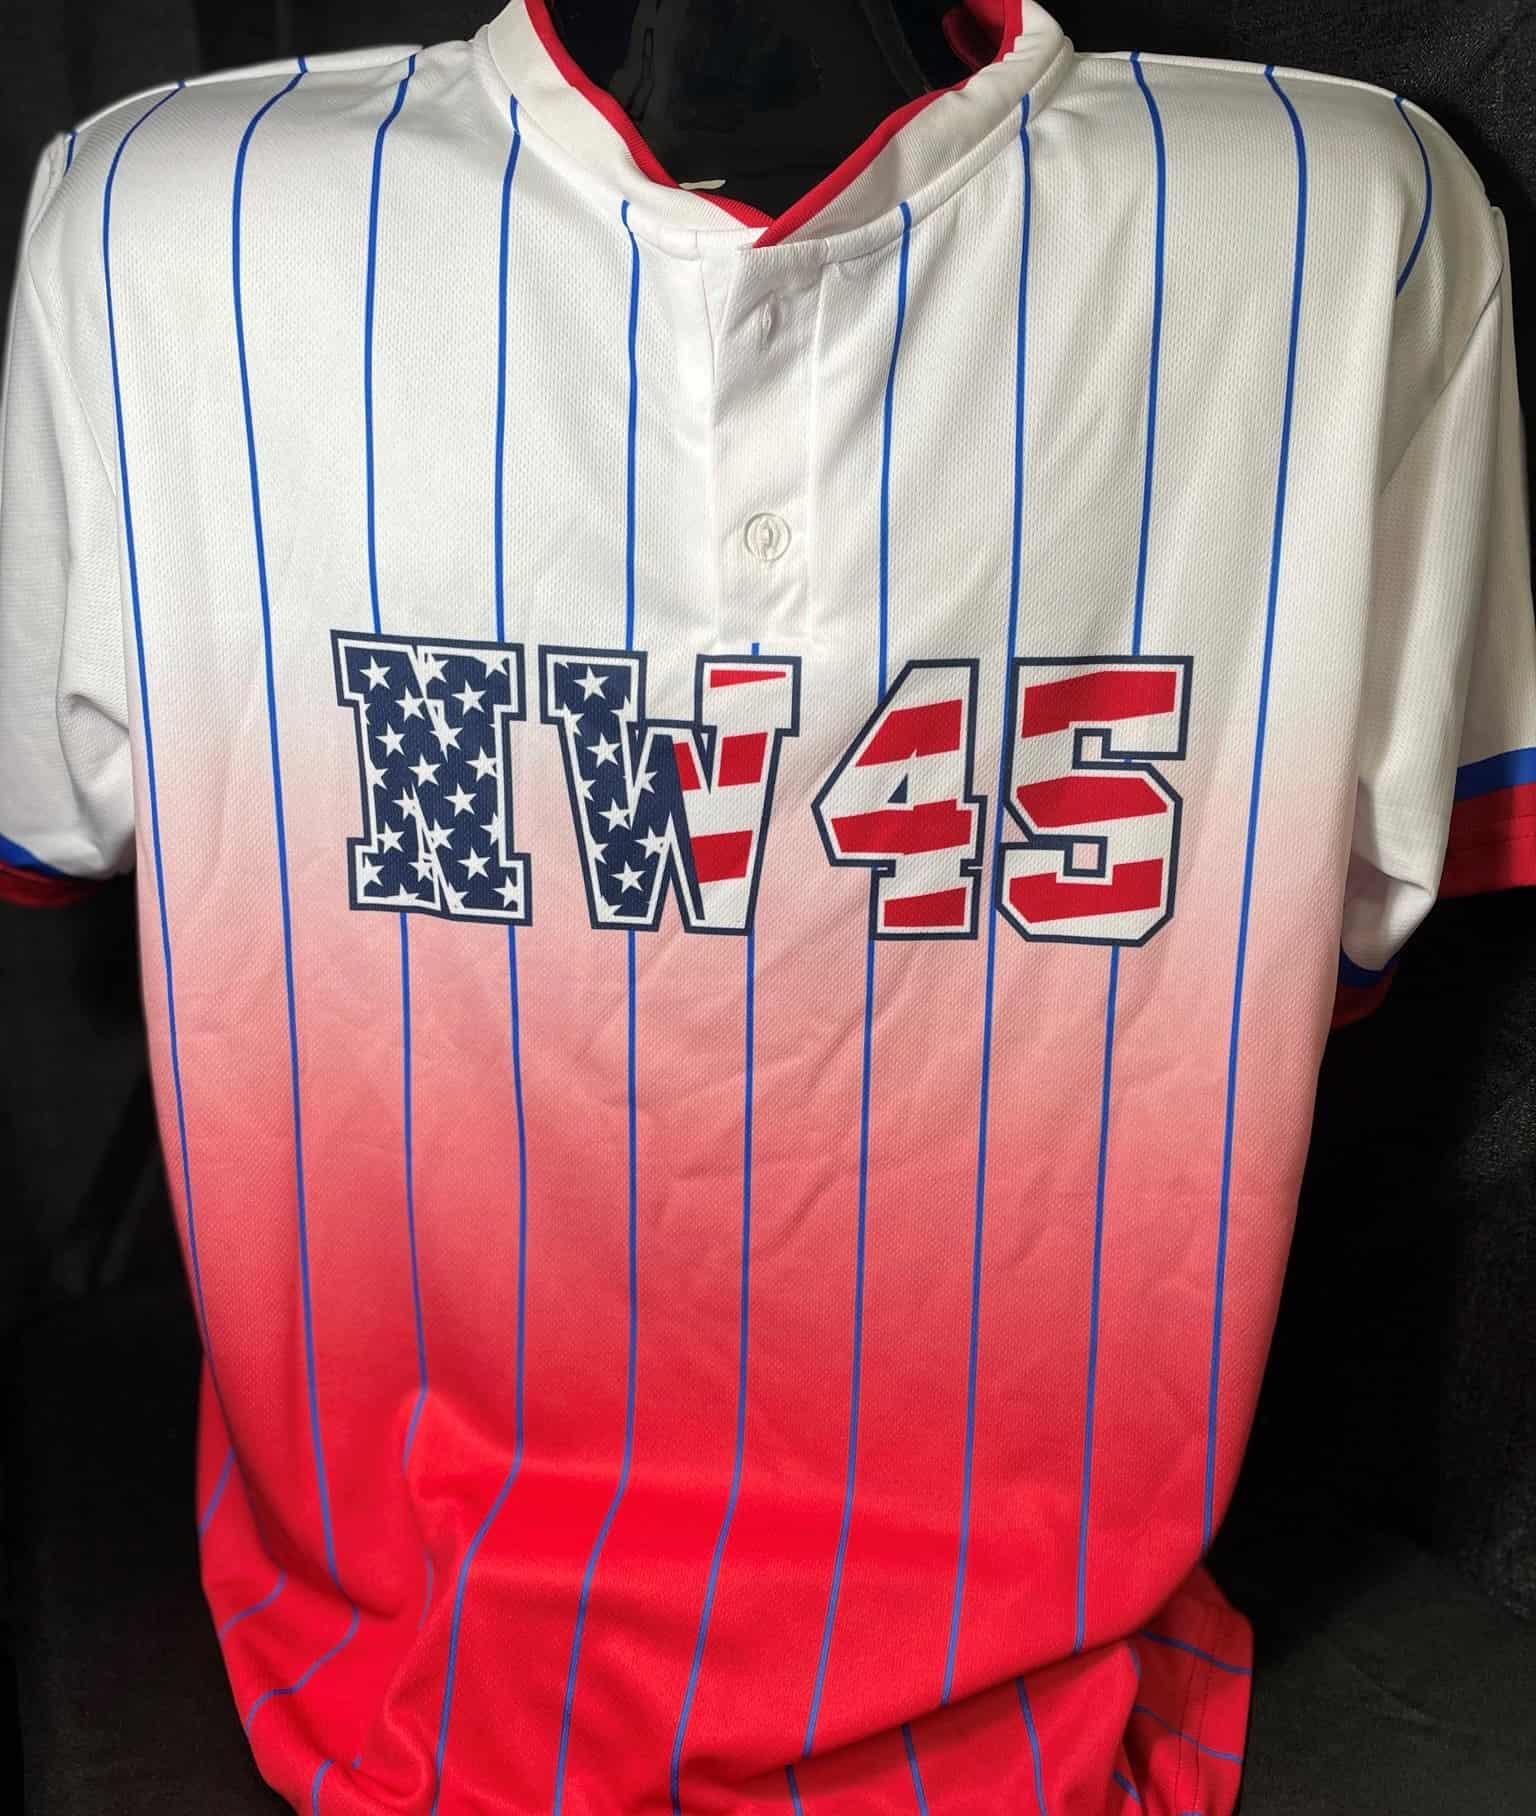 Clubhouse store jerseys badly price gouged ($175 for replica Cool